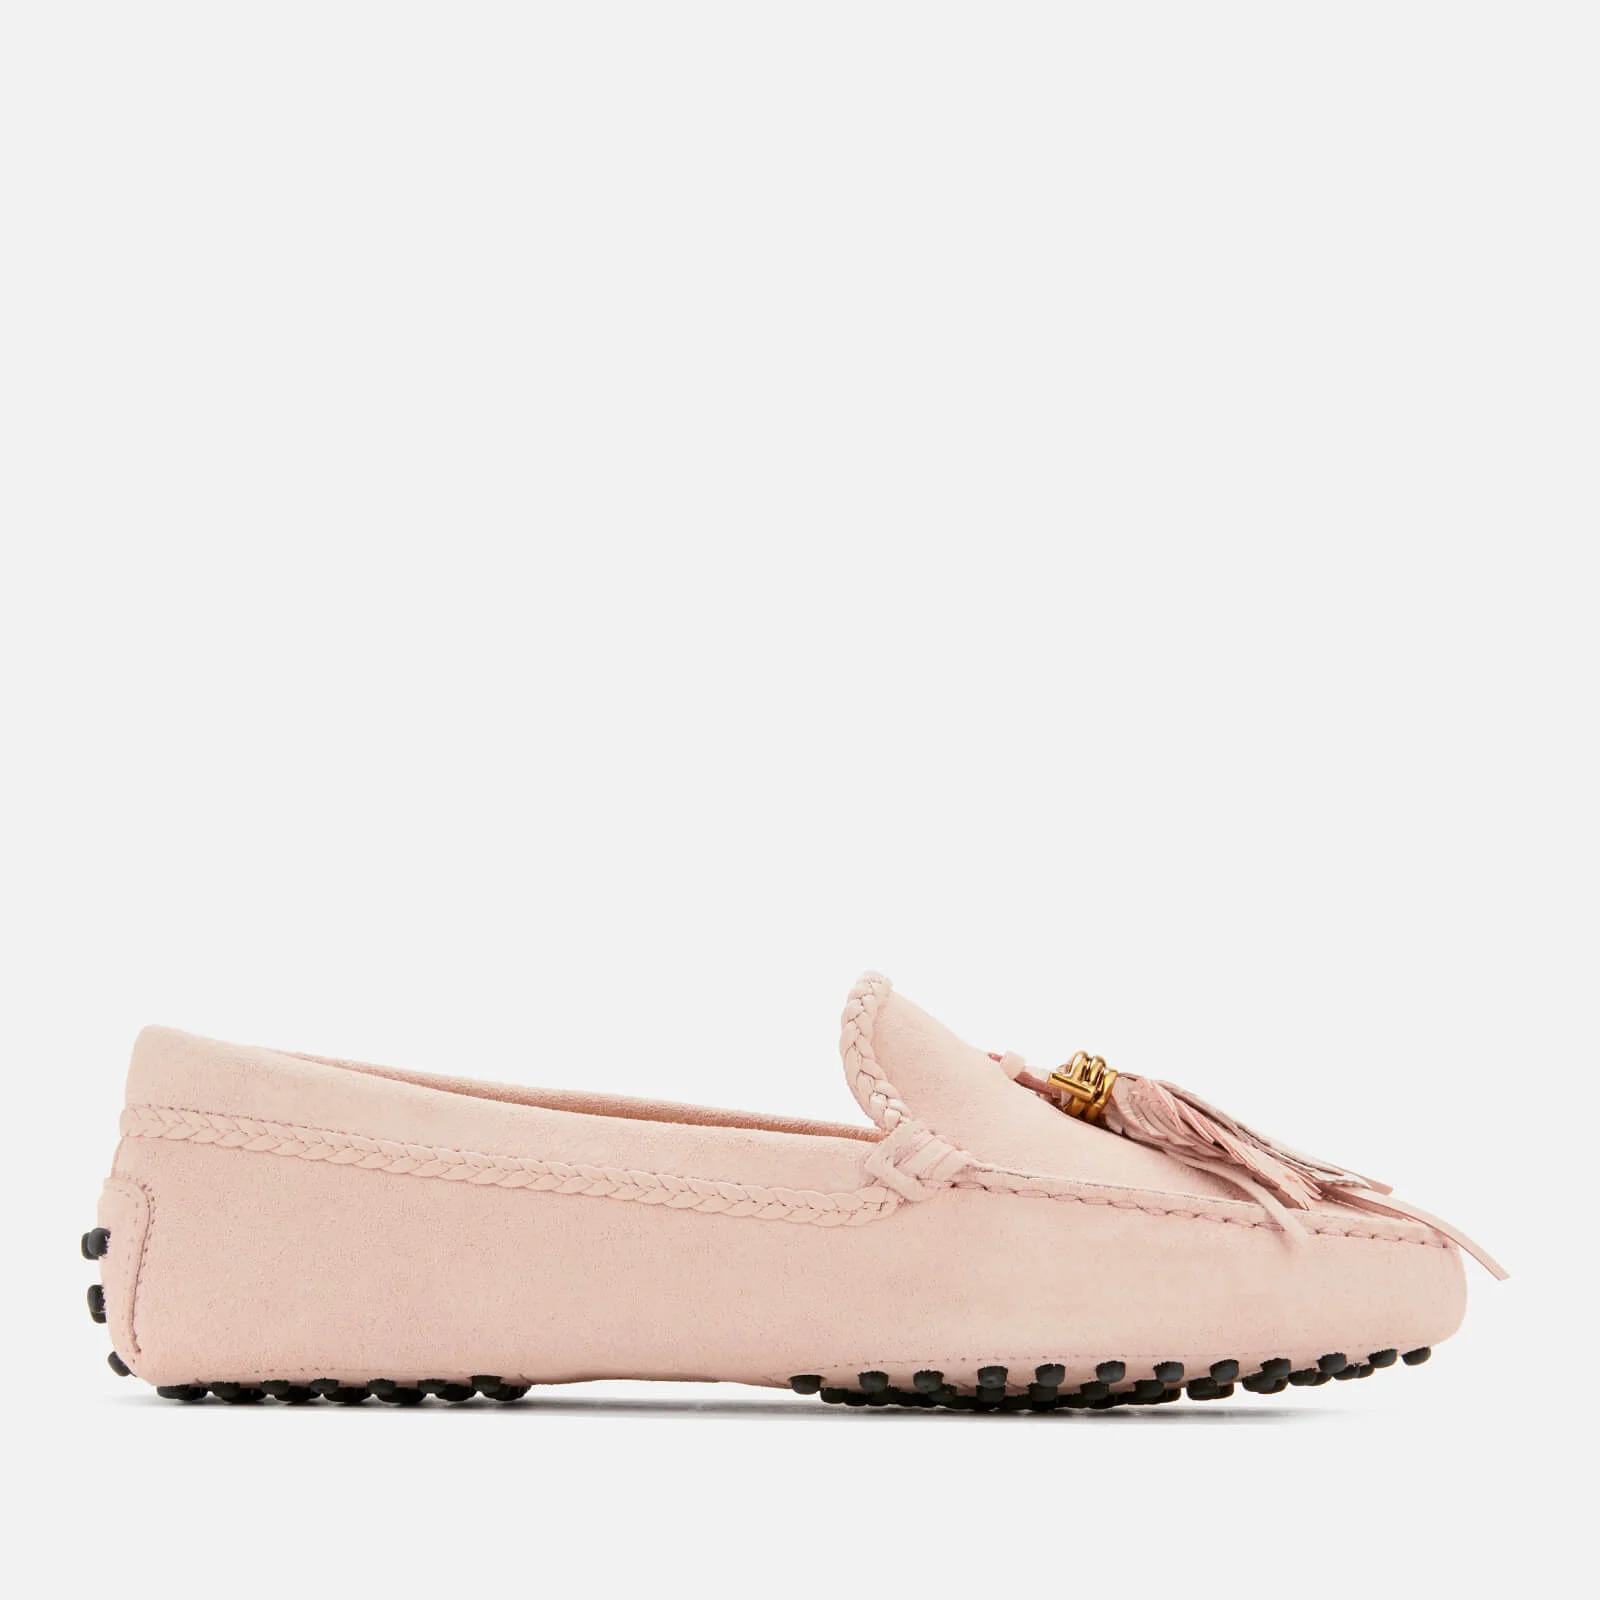 Tod's Women's Gommino Feather Moccasin Shoes - Glove Image 1